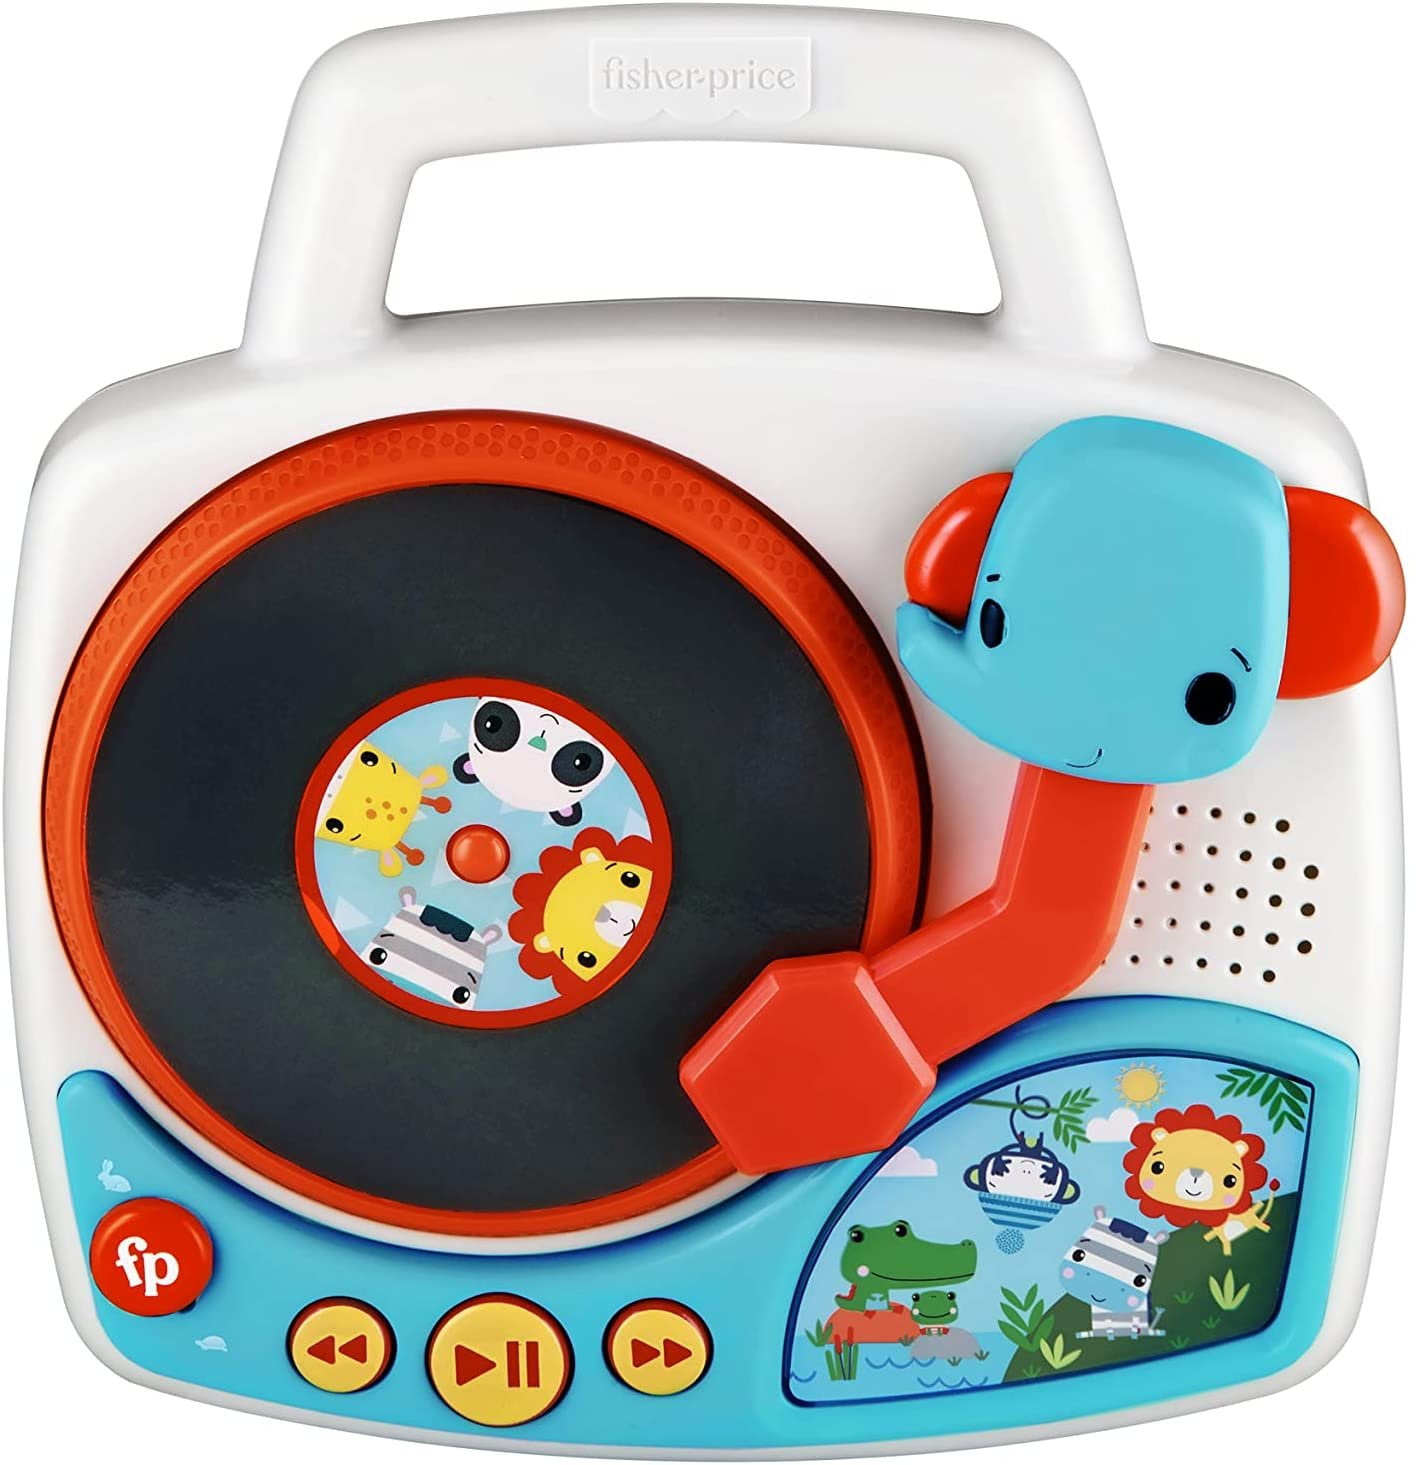 eKids Fisher Price Turntable for Toddlers with Built-in Nursery and Sound Effects for Fans of Fisher Price Toys - Walmart.com